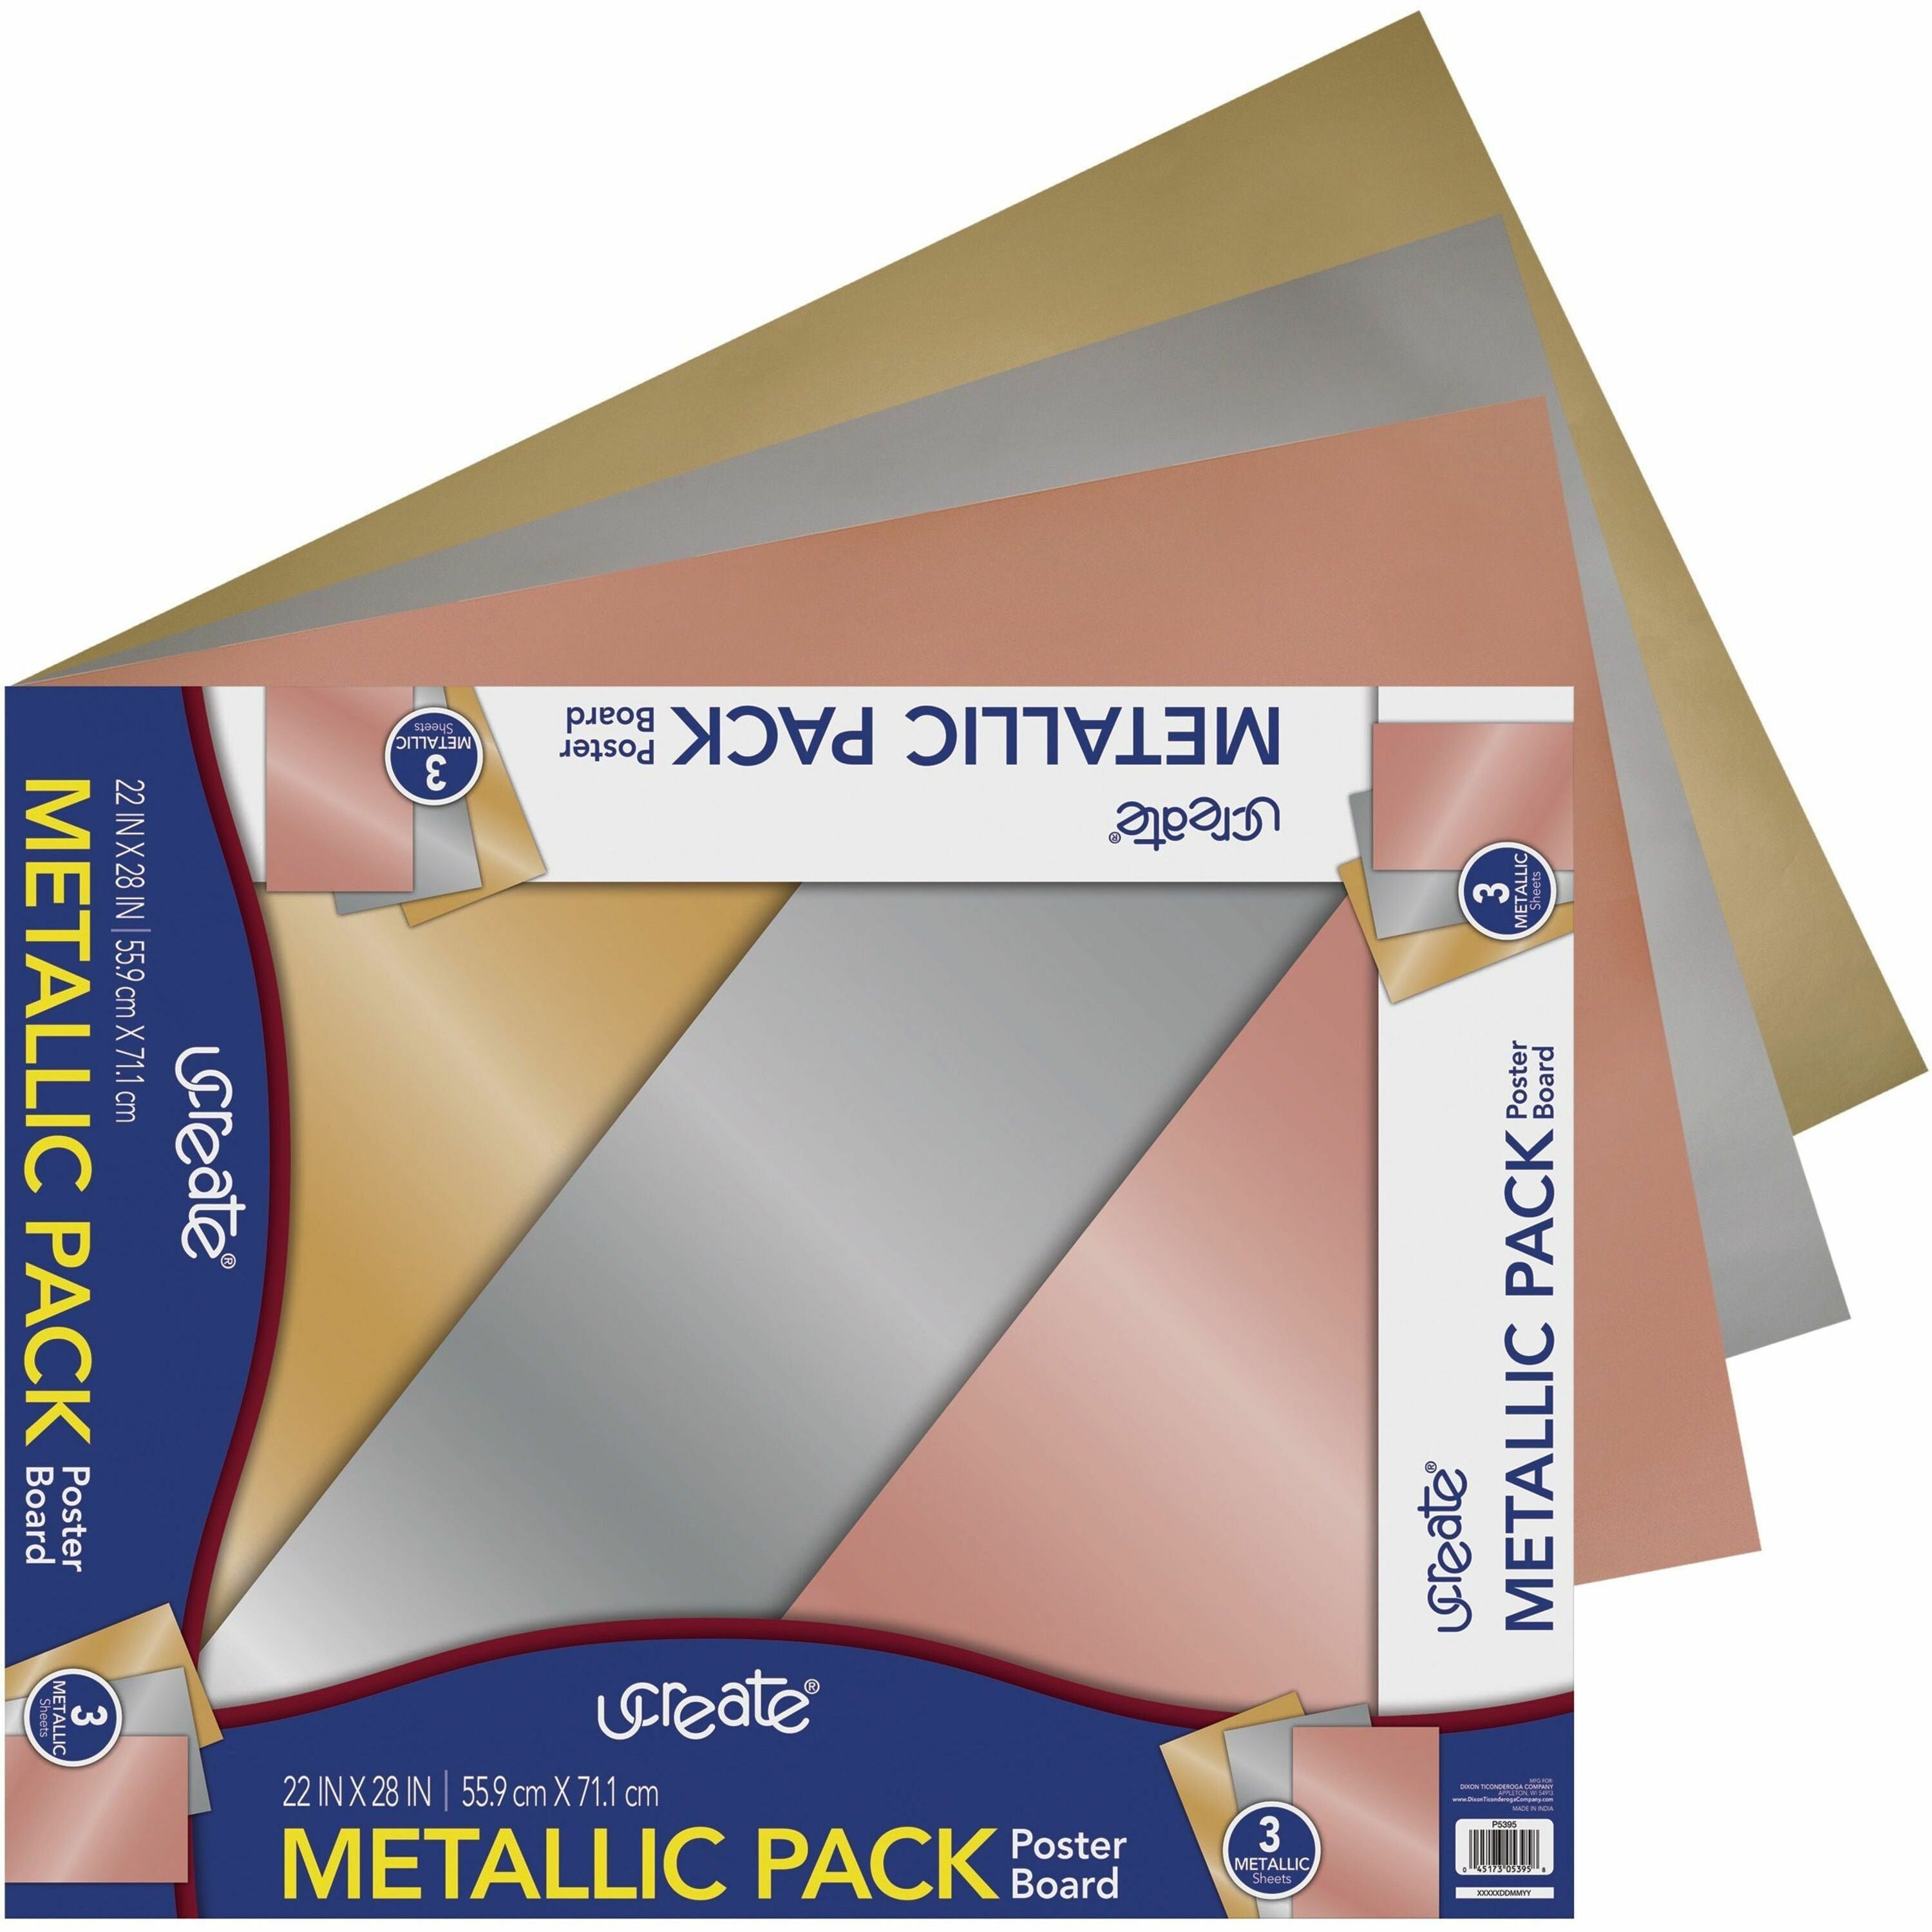 ucreate-metallic-poster-board-craft-project-art-project-mounting-poster-sign-display-22width-x-28length-3-pack-assorted-metallic_pacp5395 - 1